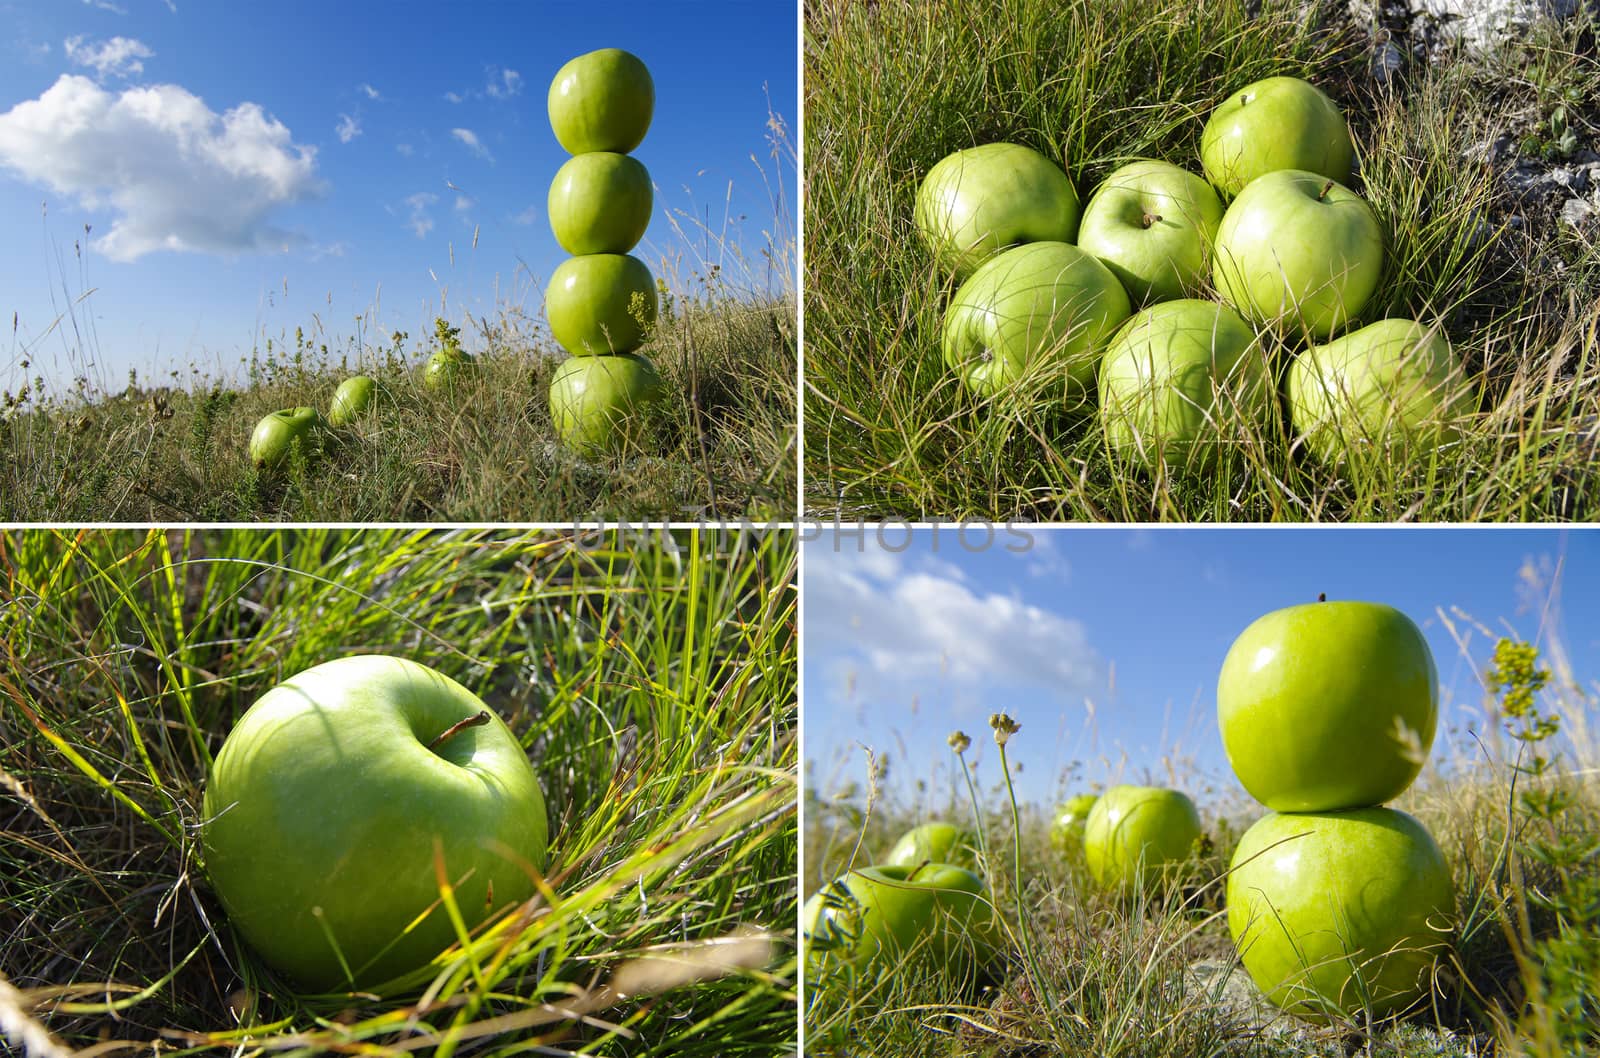 View of green apples on the grass